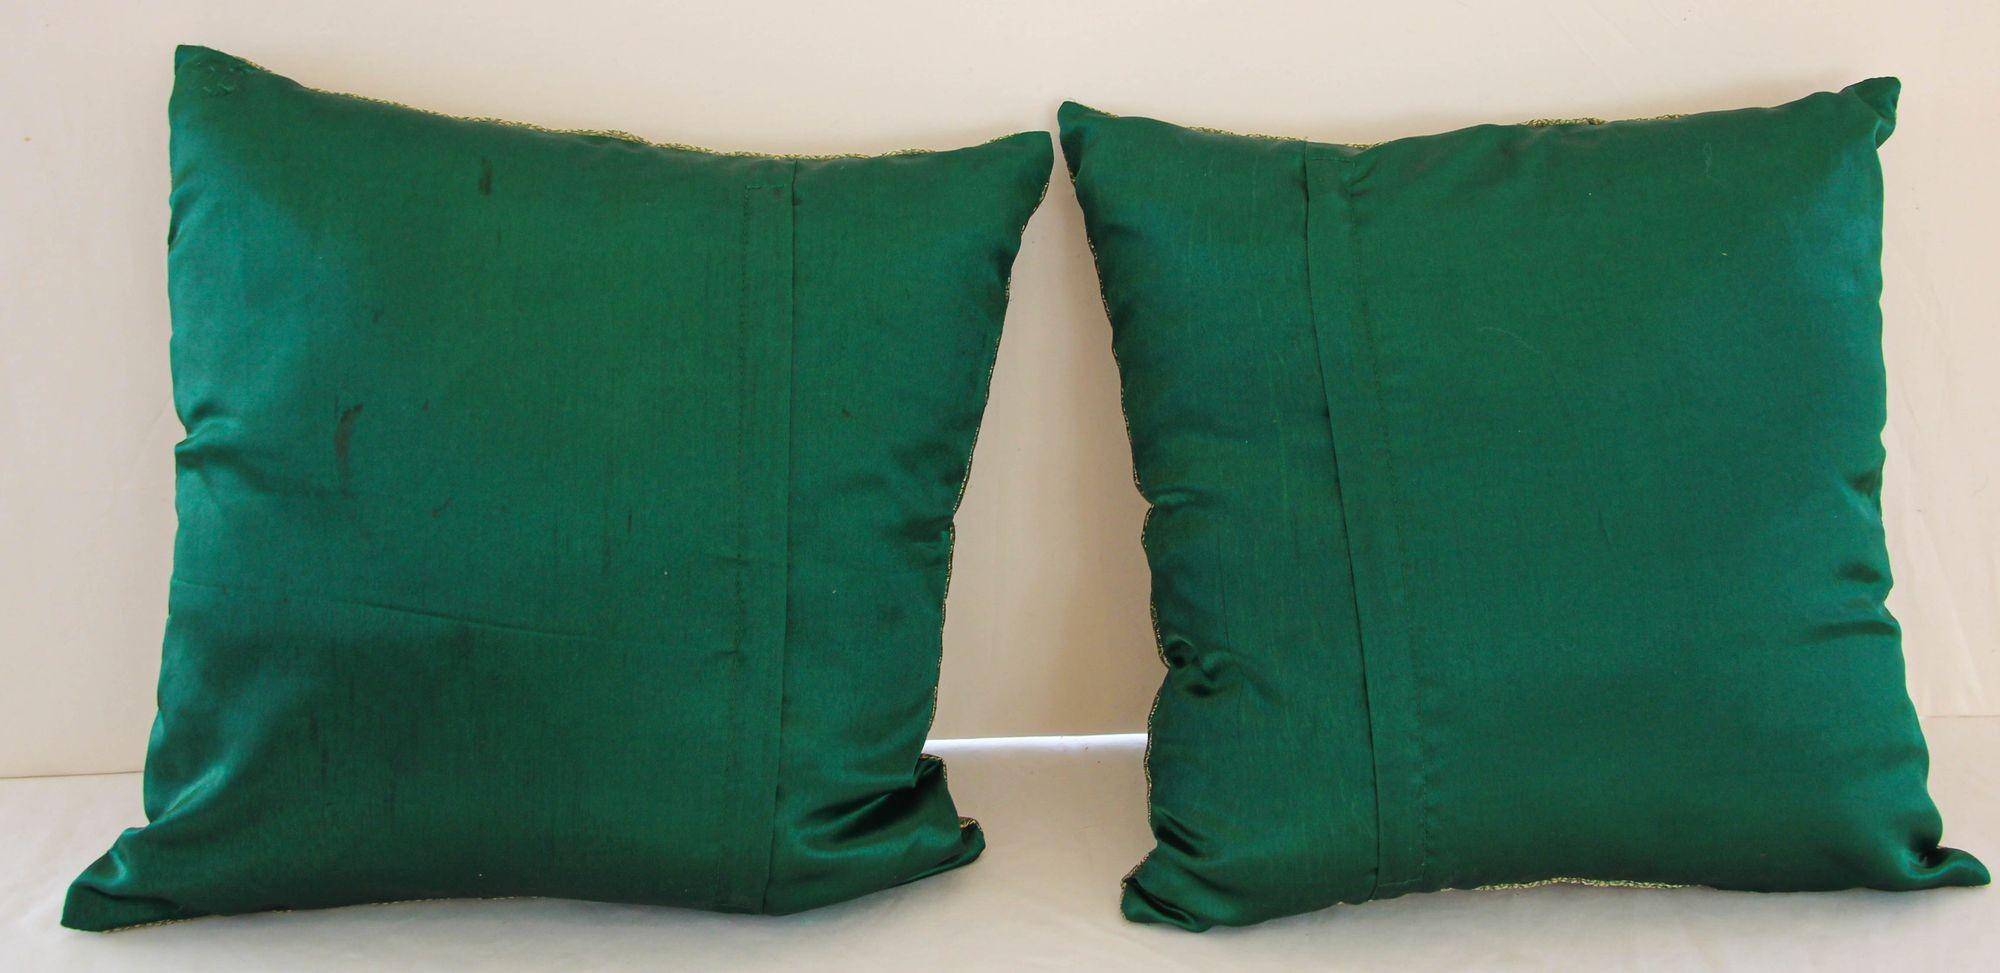 20th Century Emerald Green Moorish Throw Pillows Embellished with Sequins and Beads a Pair For Sale